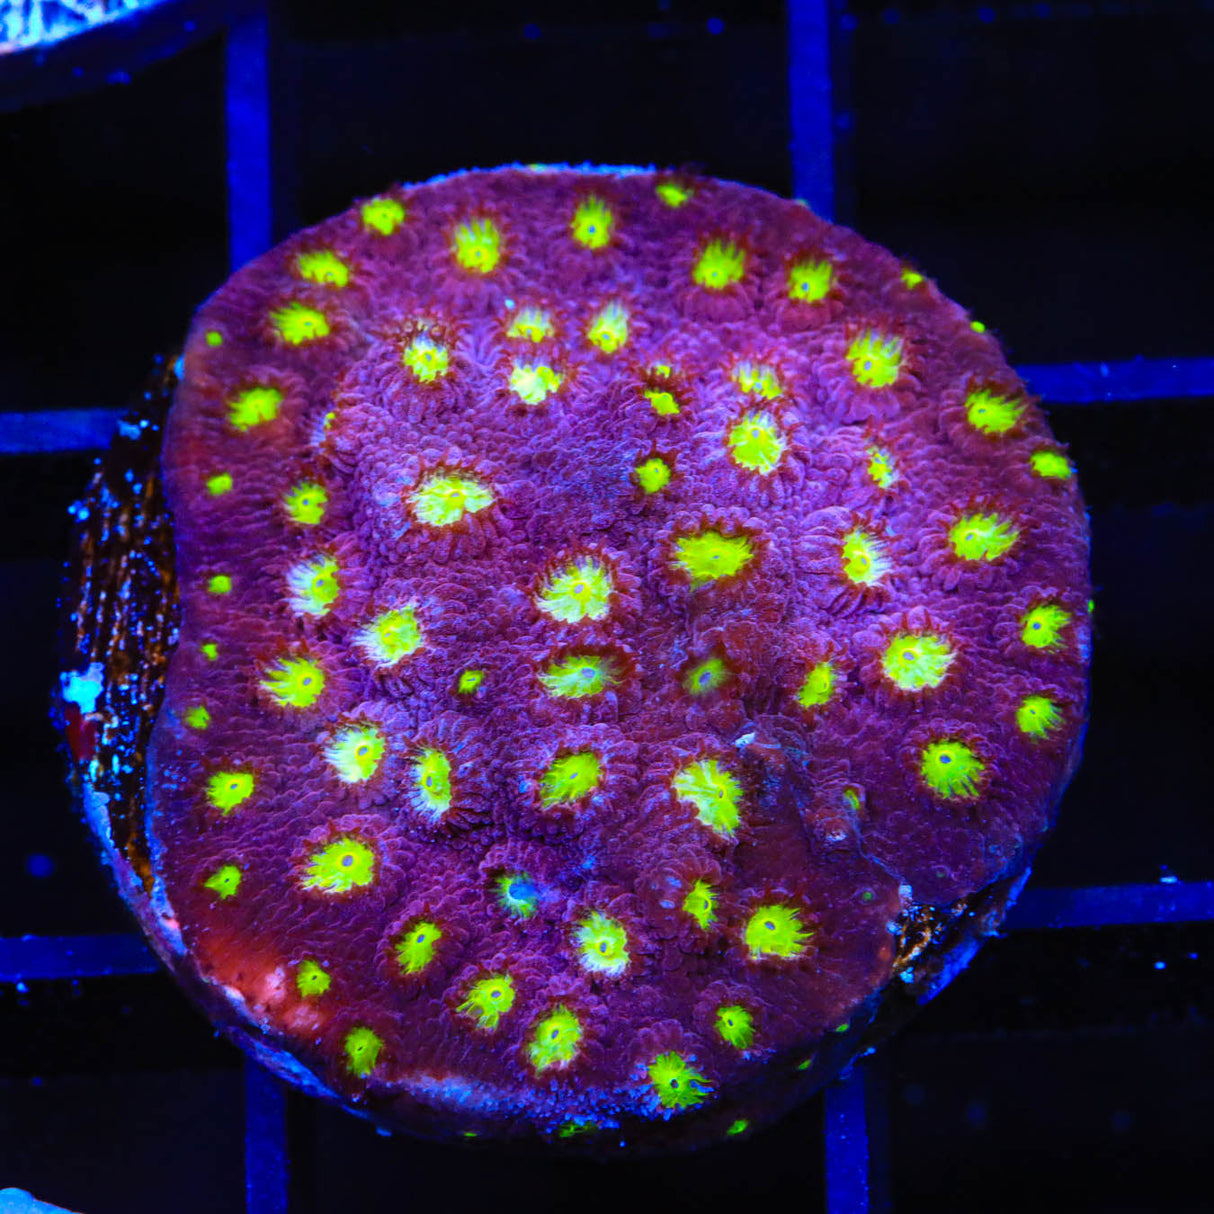 CB Bling Bling Cyphastrea Coral